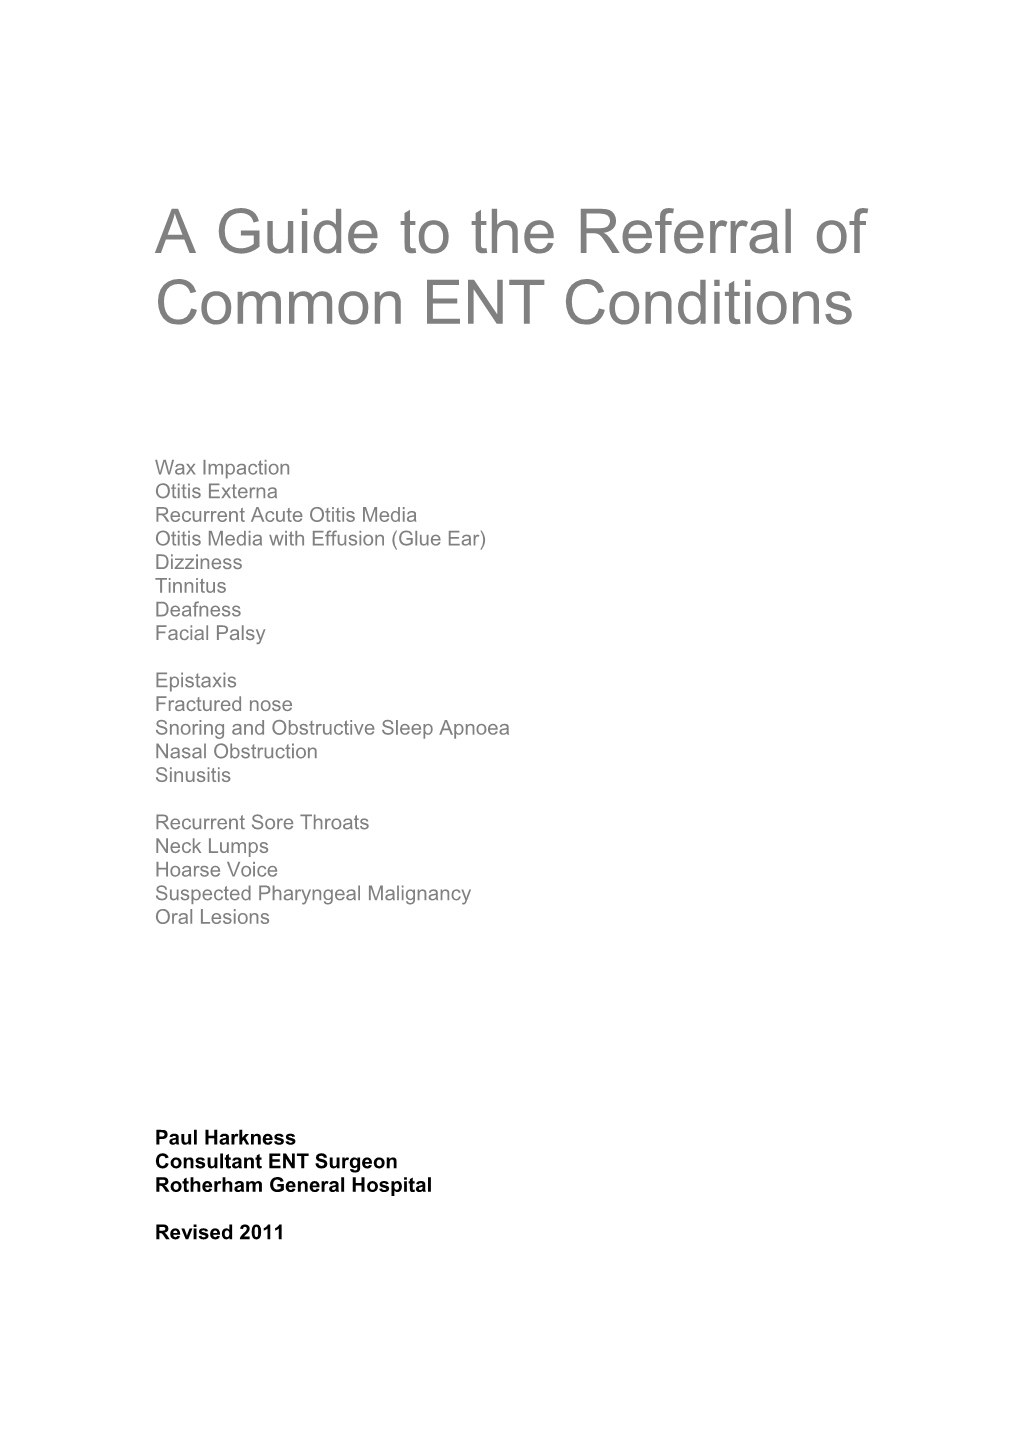 A Guide to Referral Of